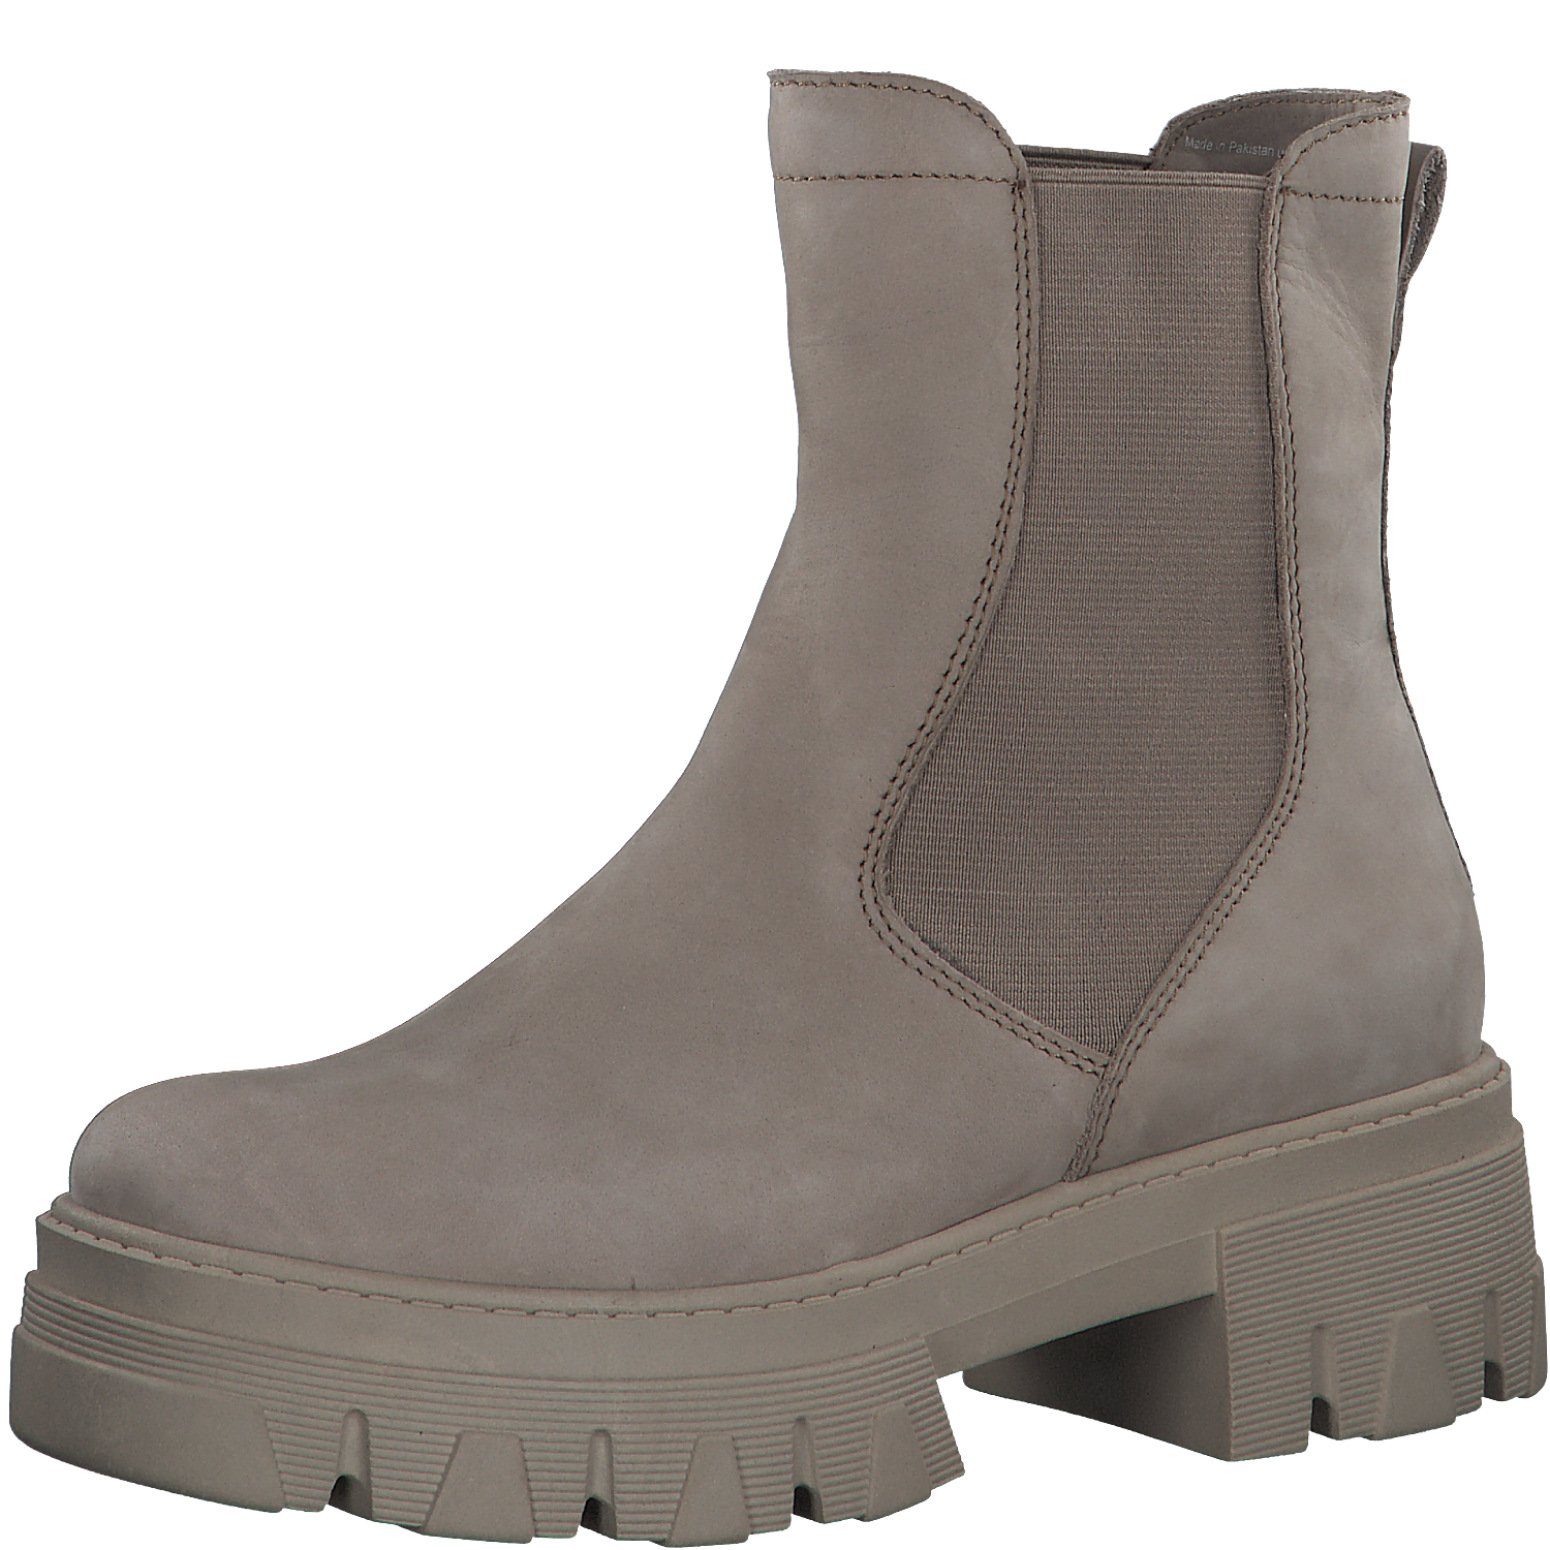 MARCO TOZZI (13002356) Taupe Feel Stiefelette Me TAUPE Stiefelette Marco Tozzi